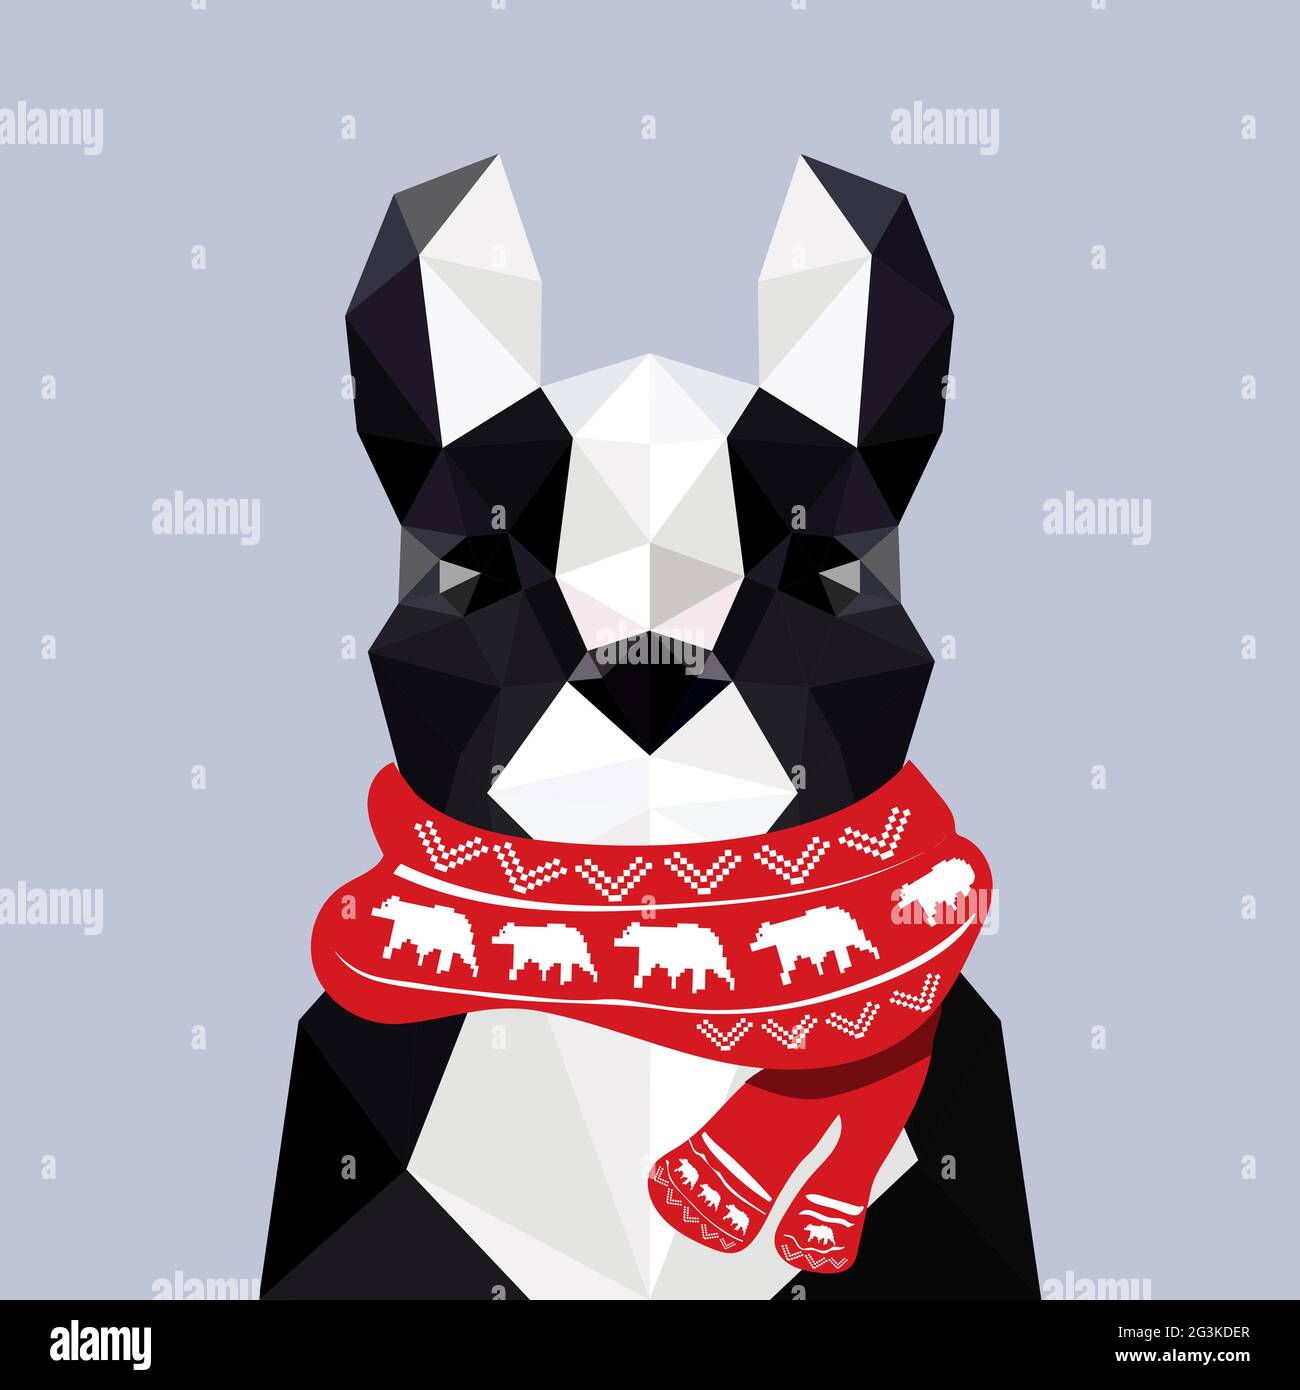 Modern flat design with origami french bulldog wearing Christmas scarf Stock Photo